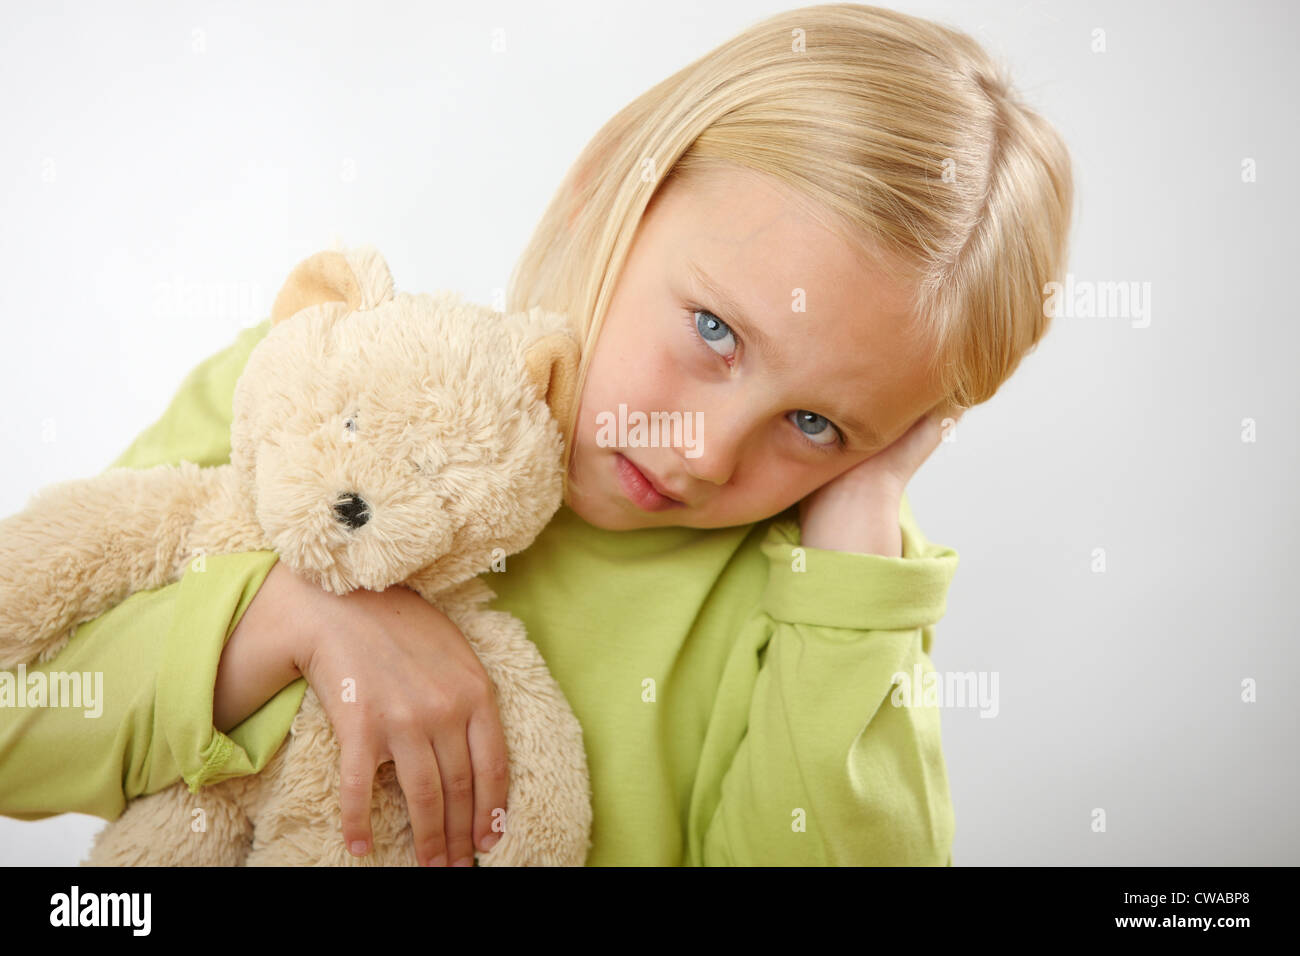 Girl with teddy covering ears Stock Photo